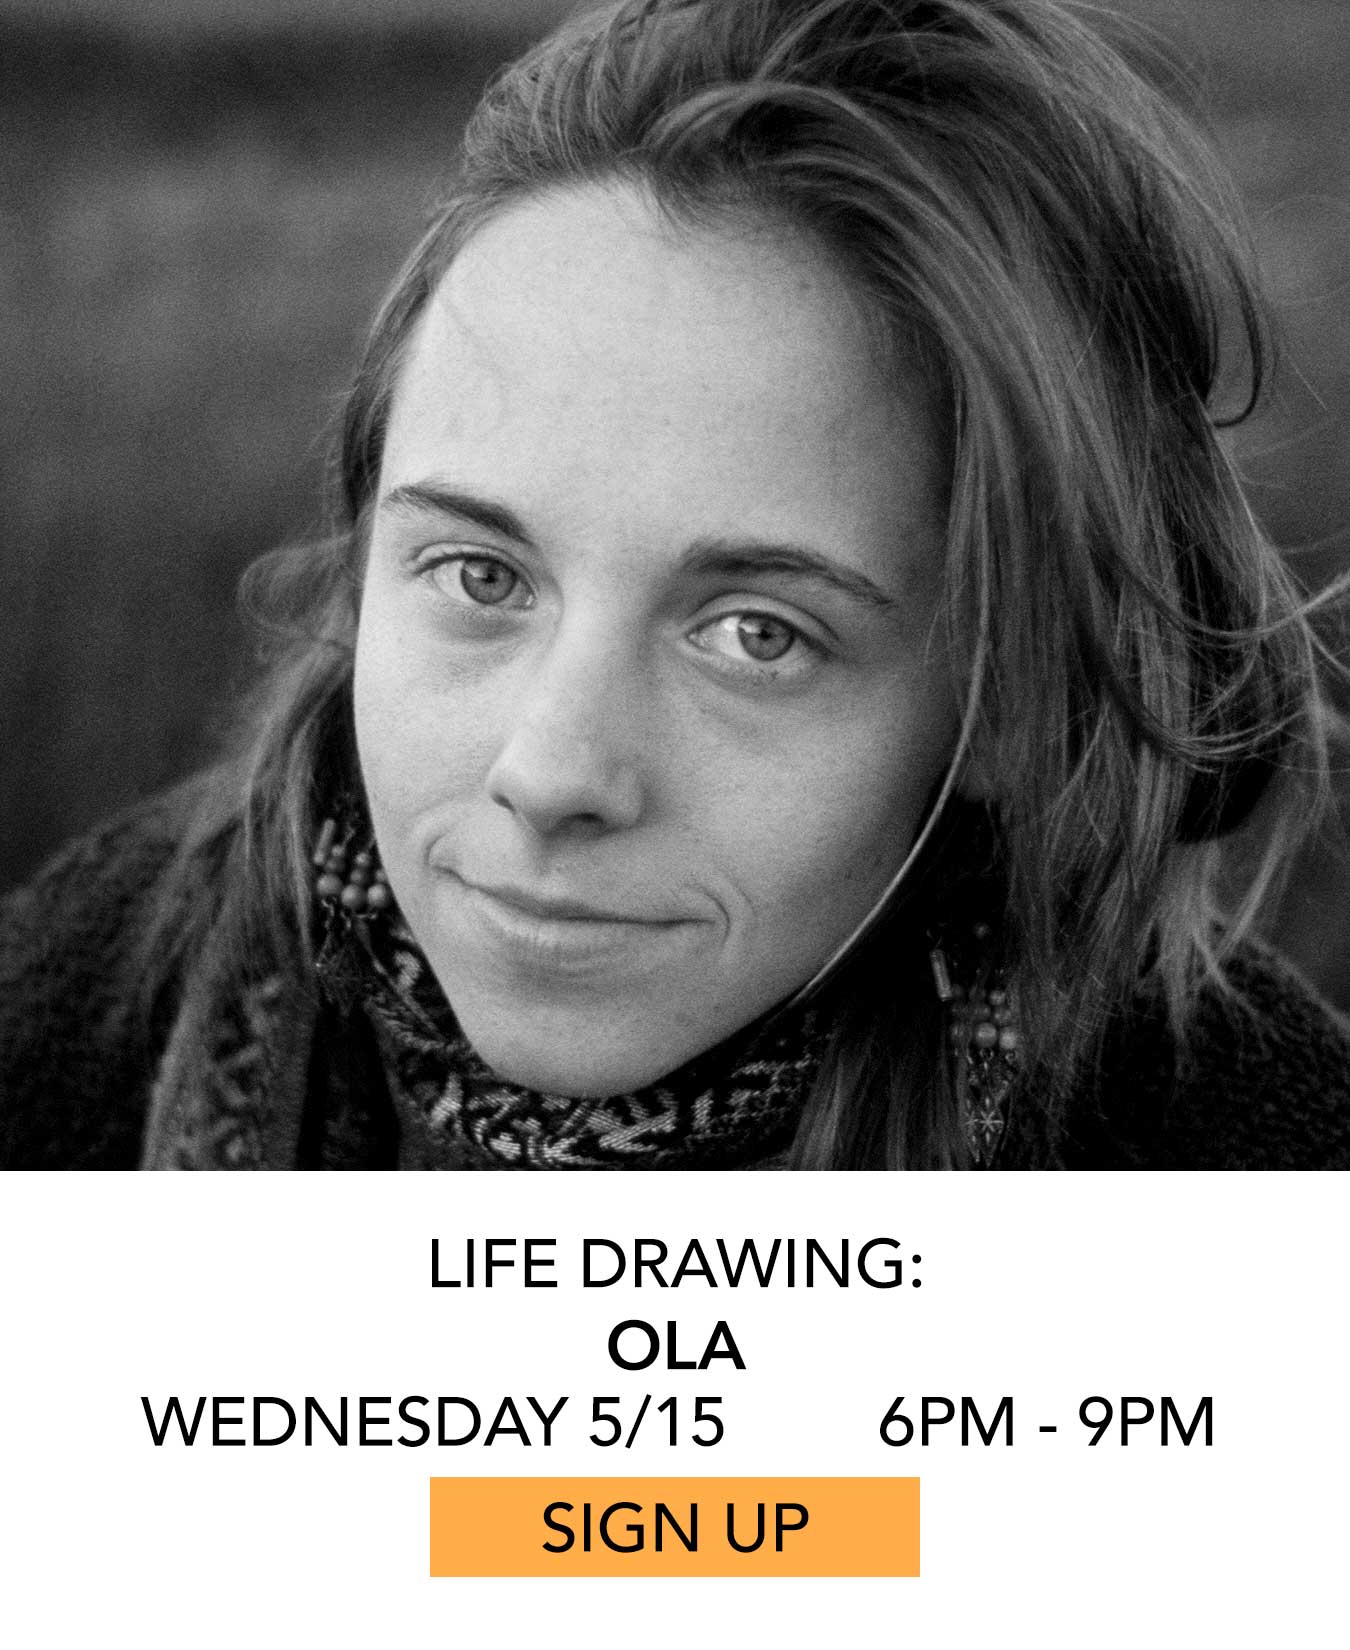 Life Drawing: Ola. Wednesday 5/15 from 6pm to 9pm. Click to Sign Up.